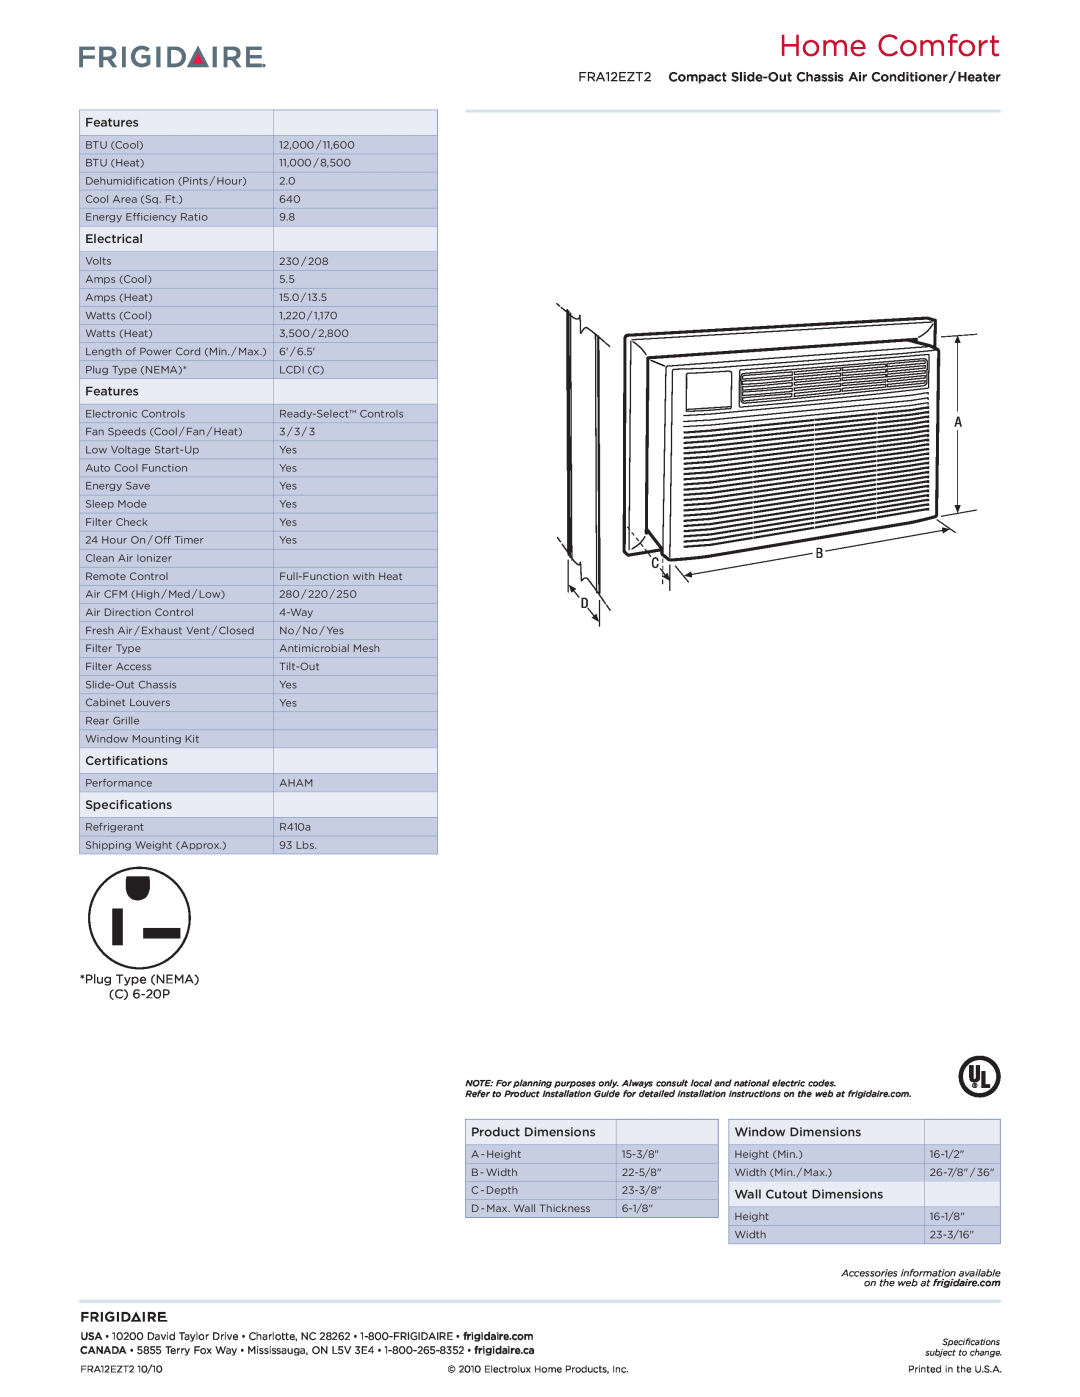 Frigidaire dimensions Home Comfort, FRA12EZT2 Compact Slide-Out Chassis Air Conditioner / Heater 